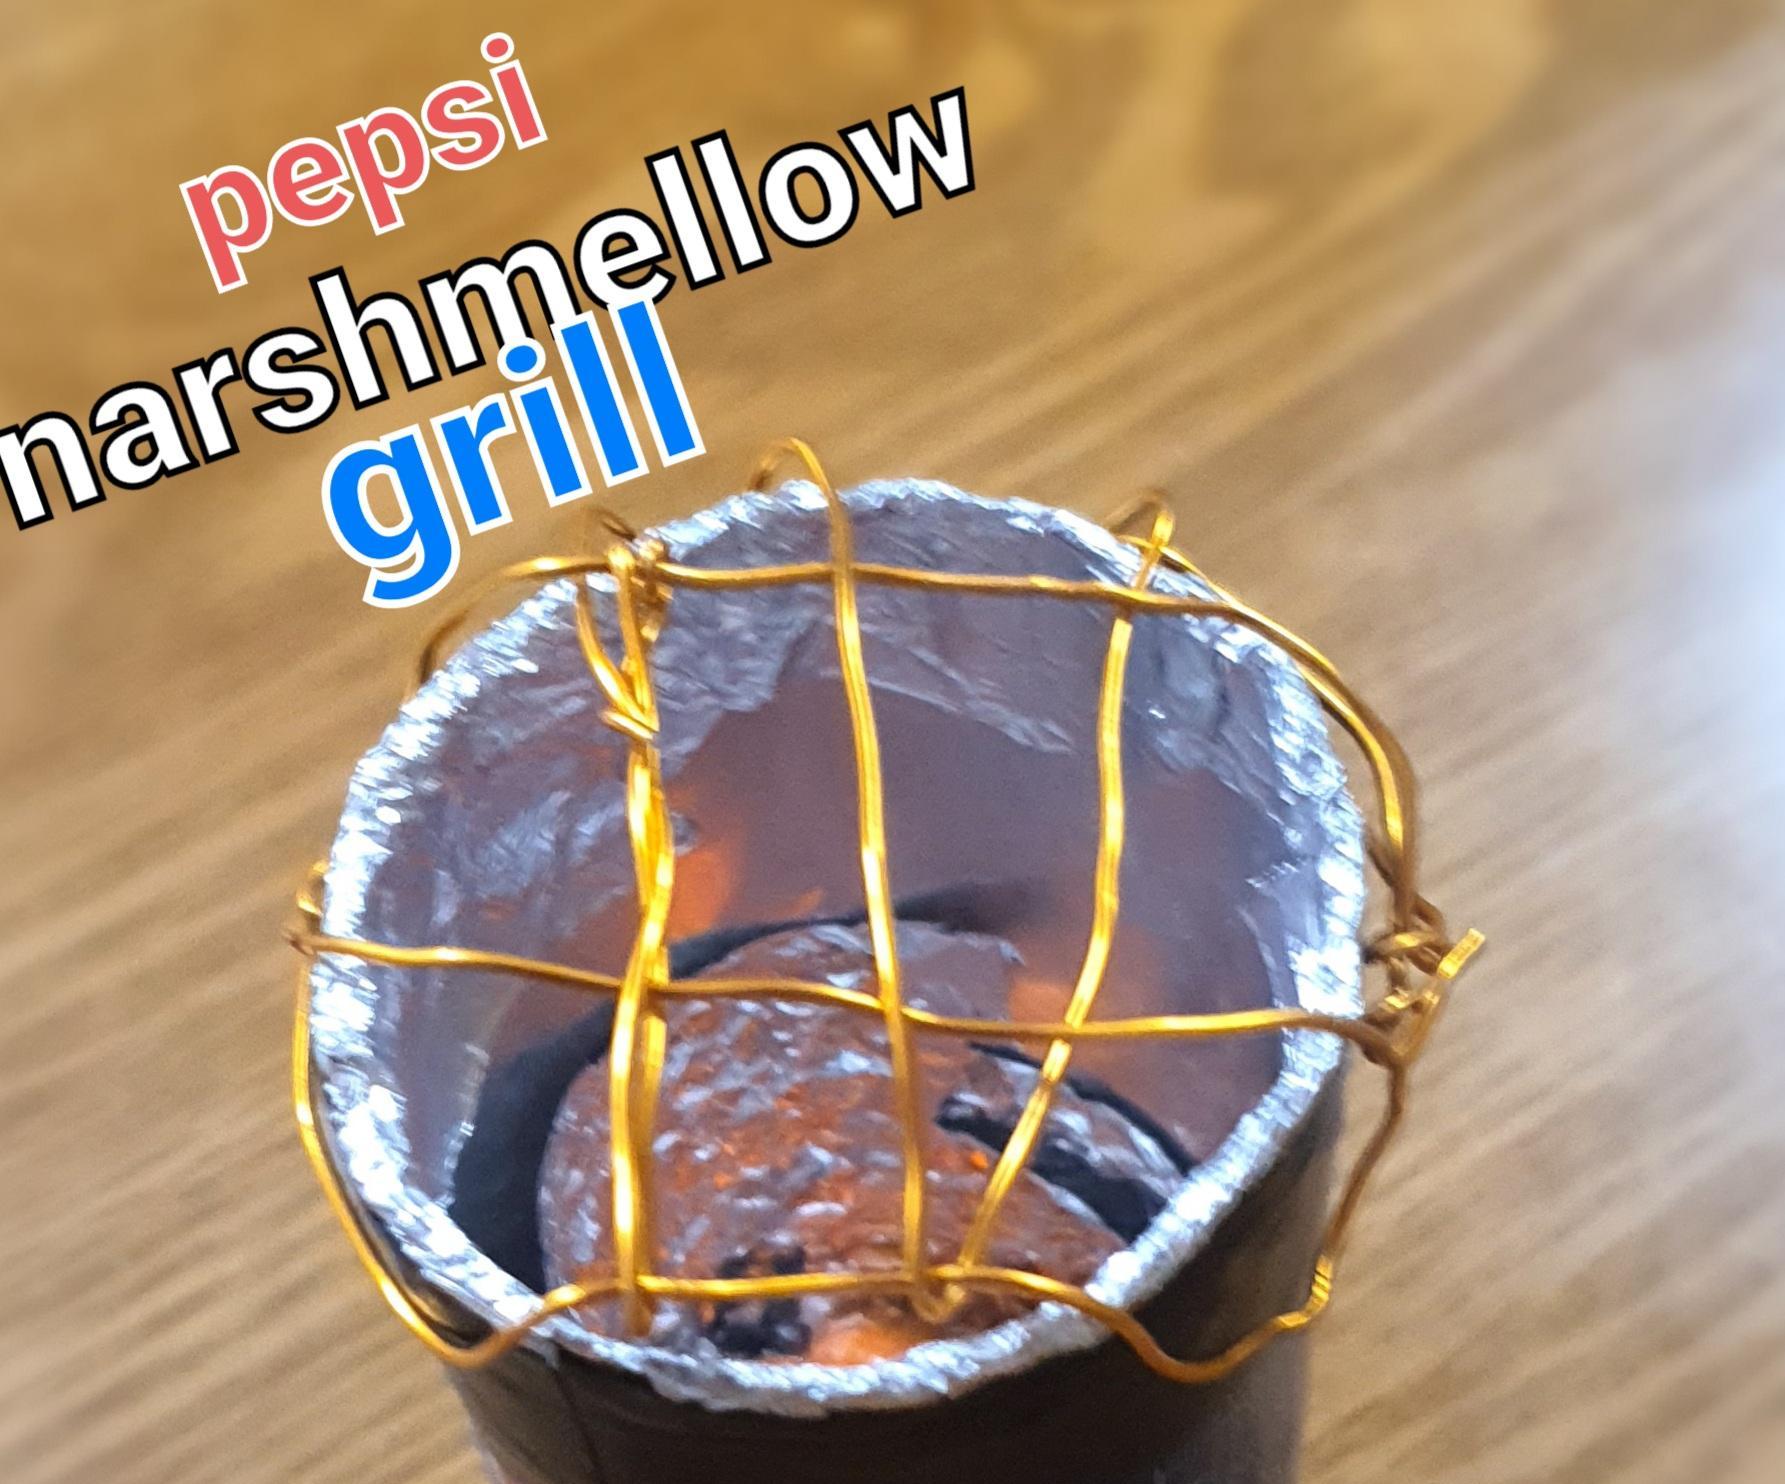 Marshmallow Grill Out of Cola Cans!